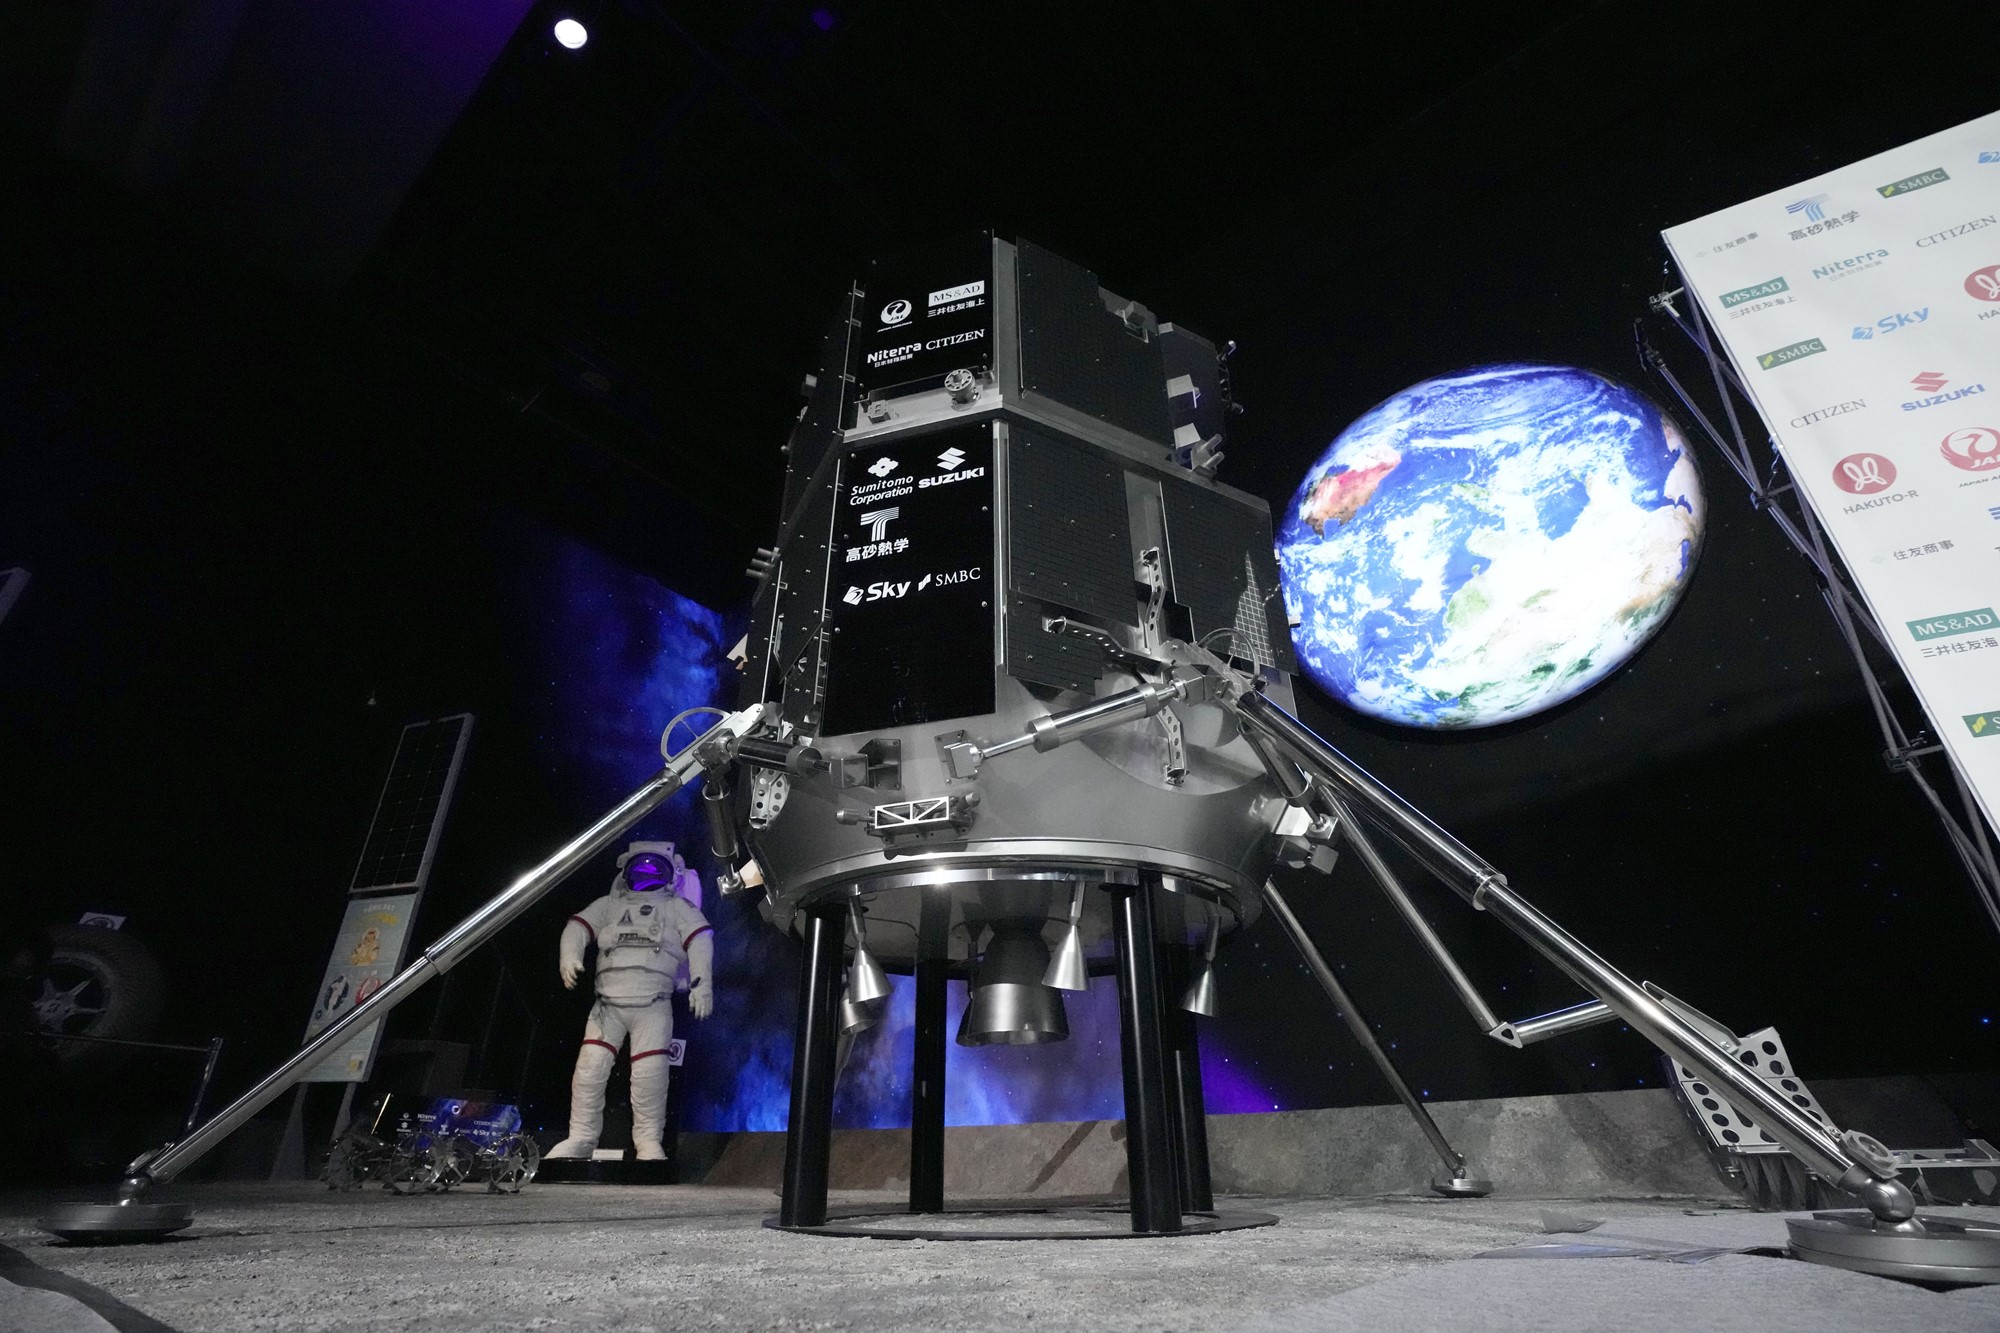 A model lander in front of a screen that shows planet Earth above it.